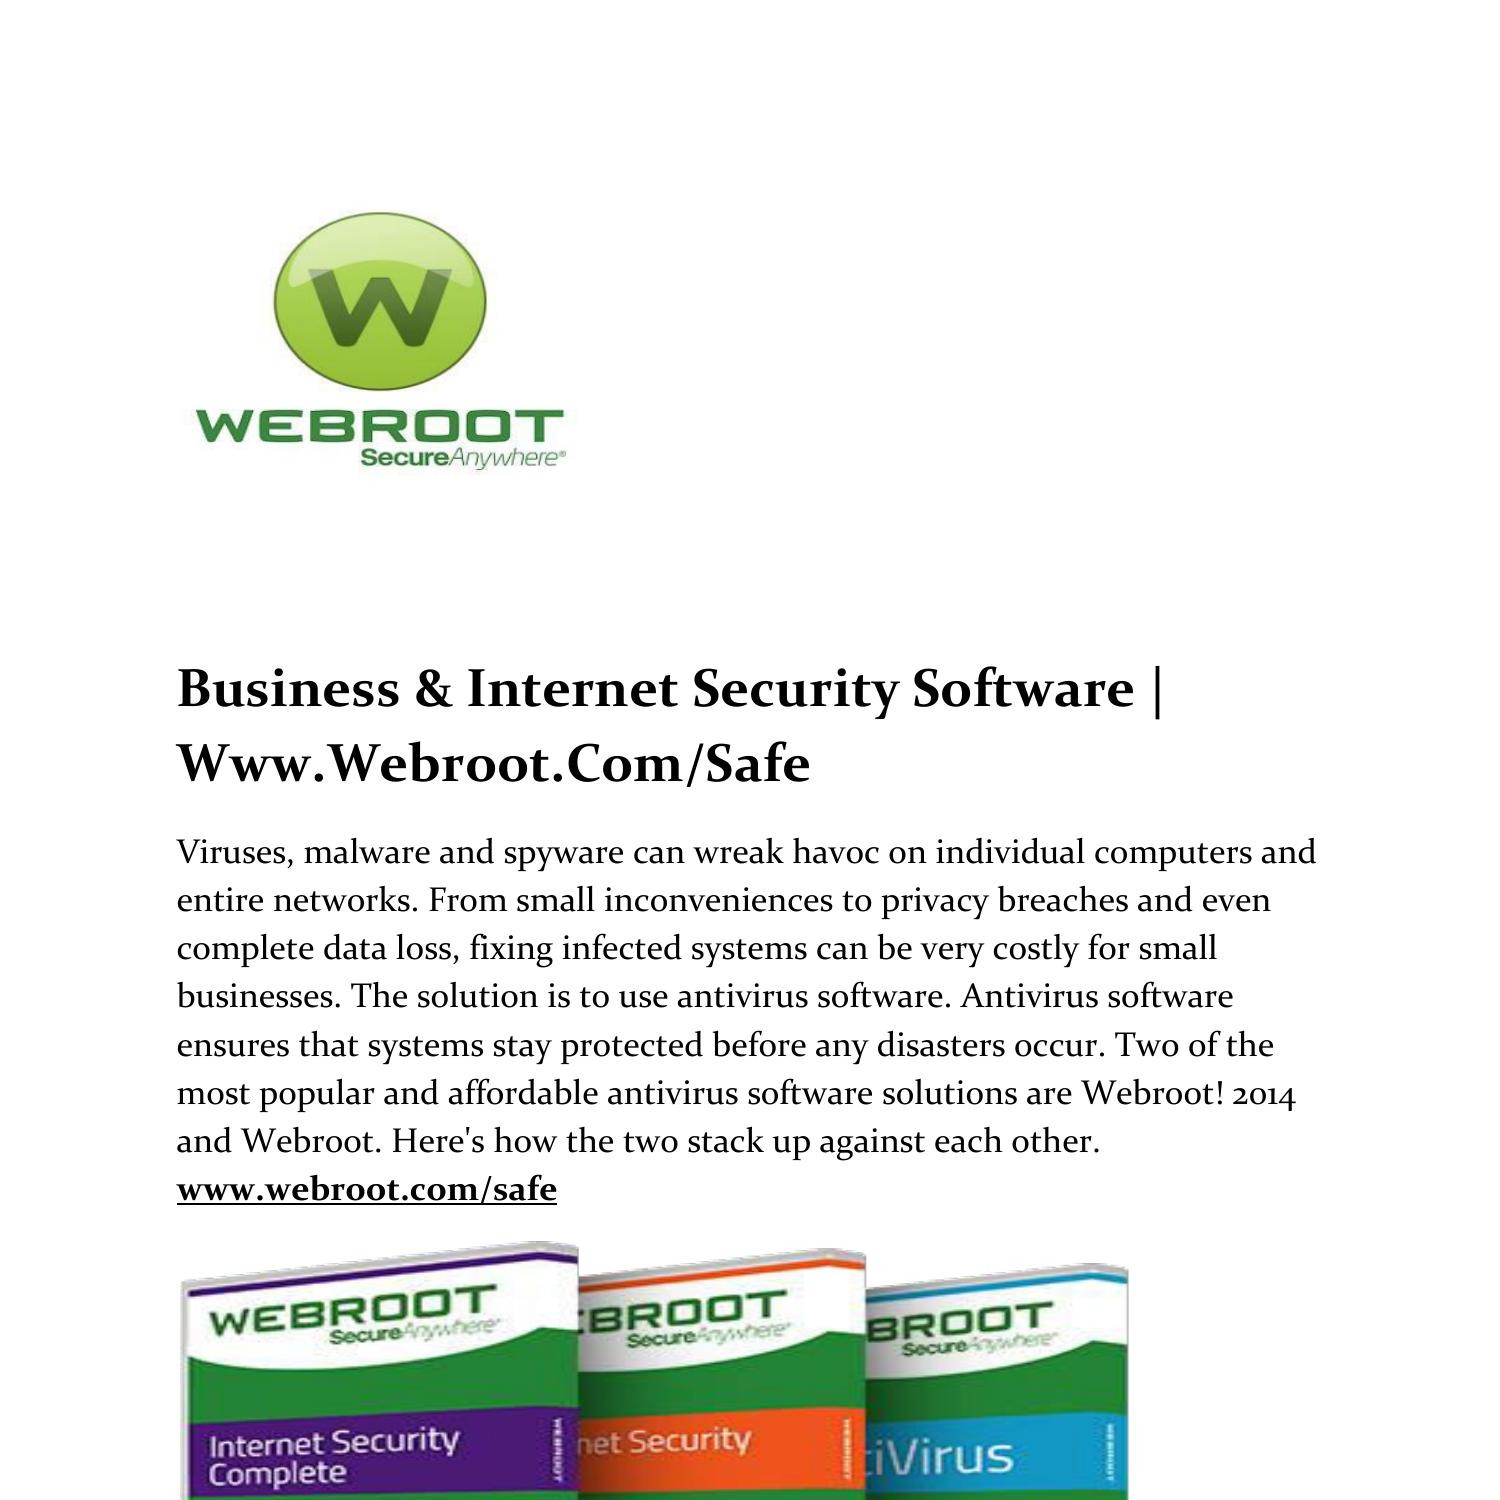 webroot internet security complete with antivirus